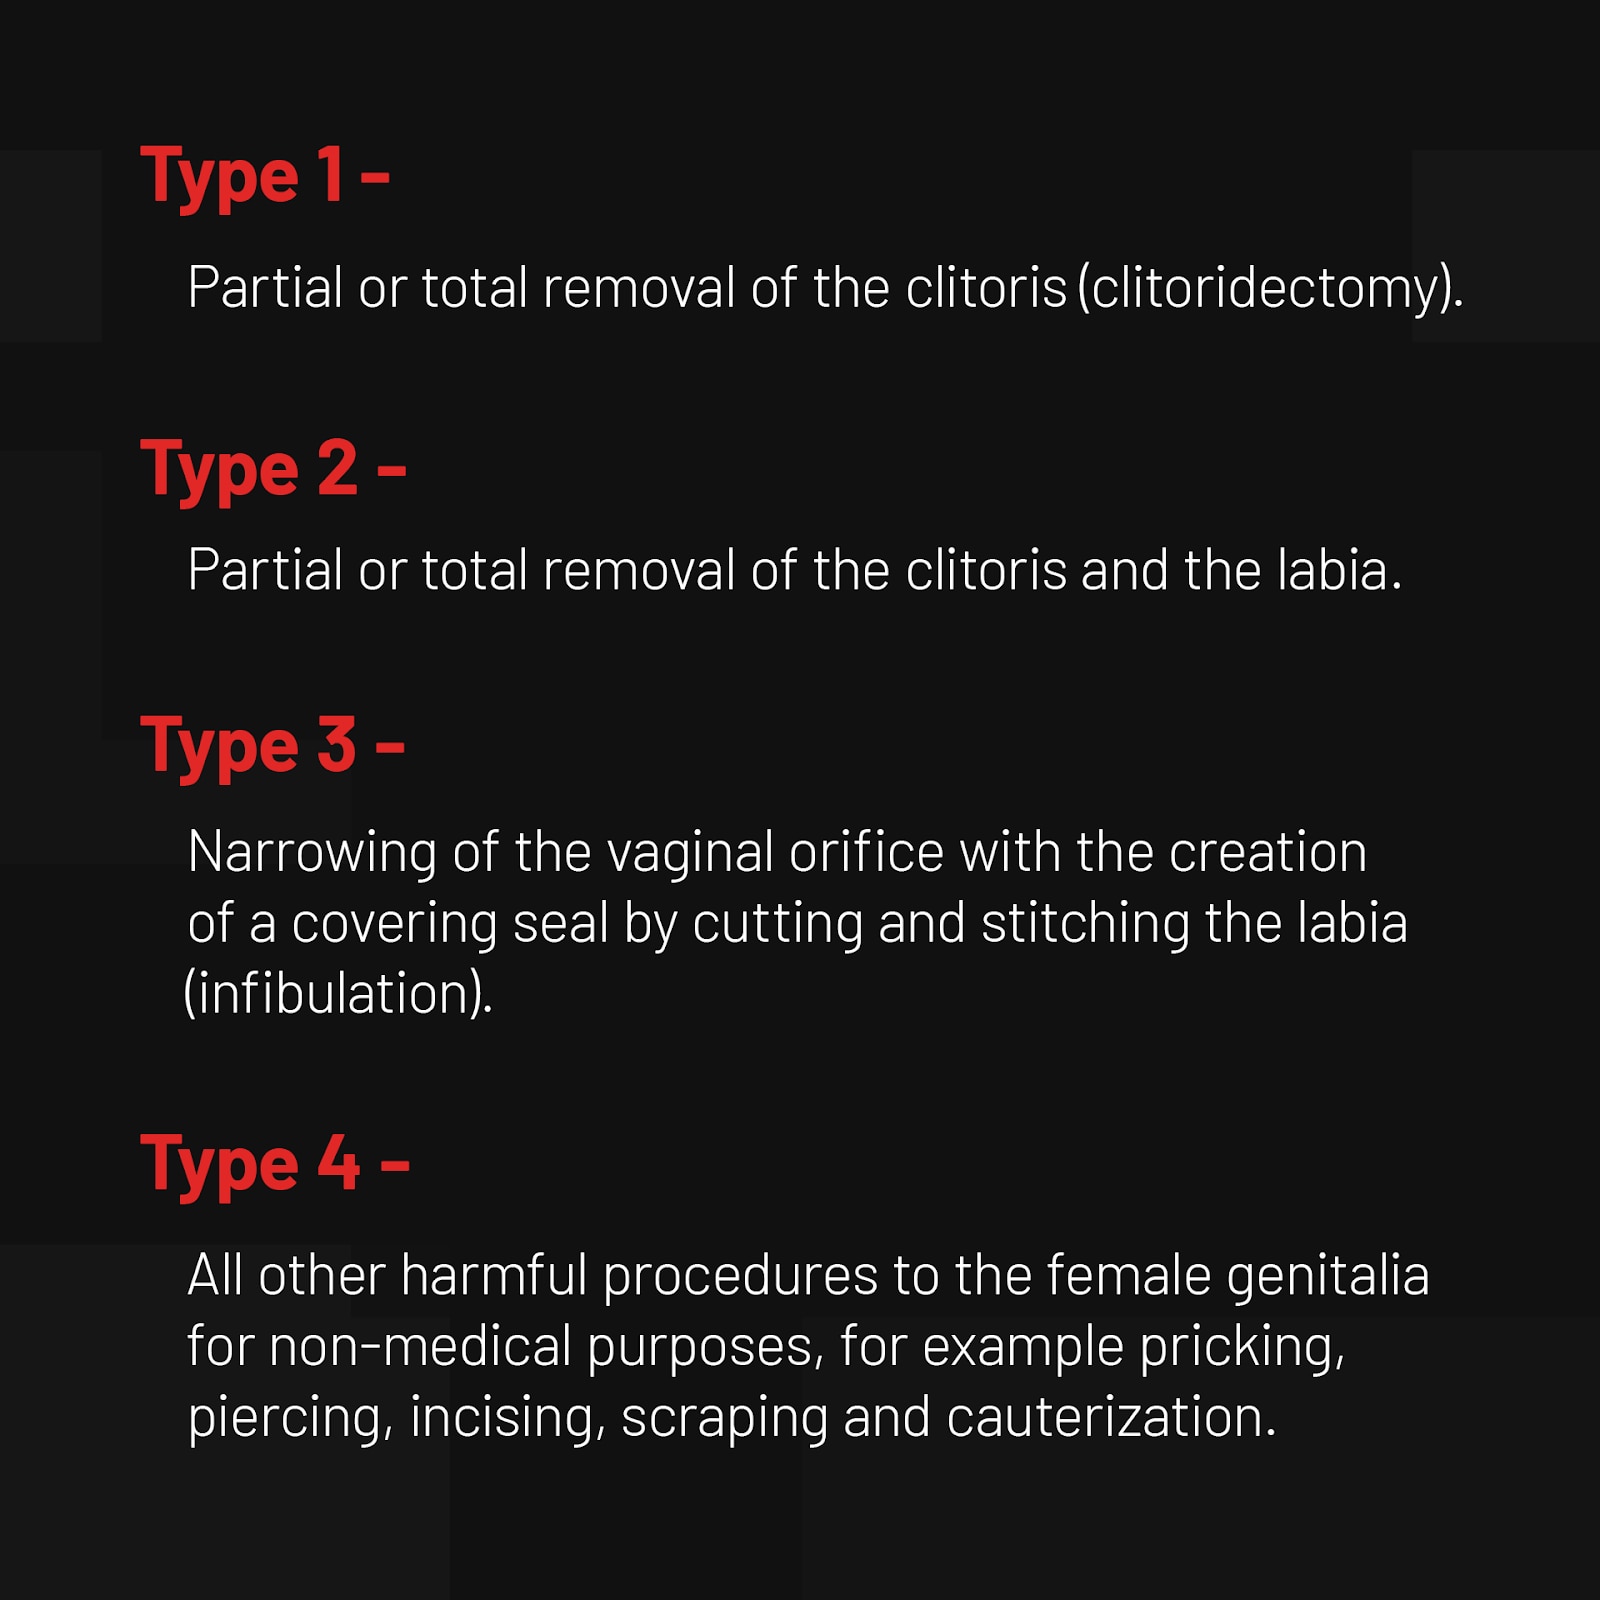 The four types of FGM.